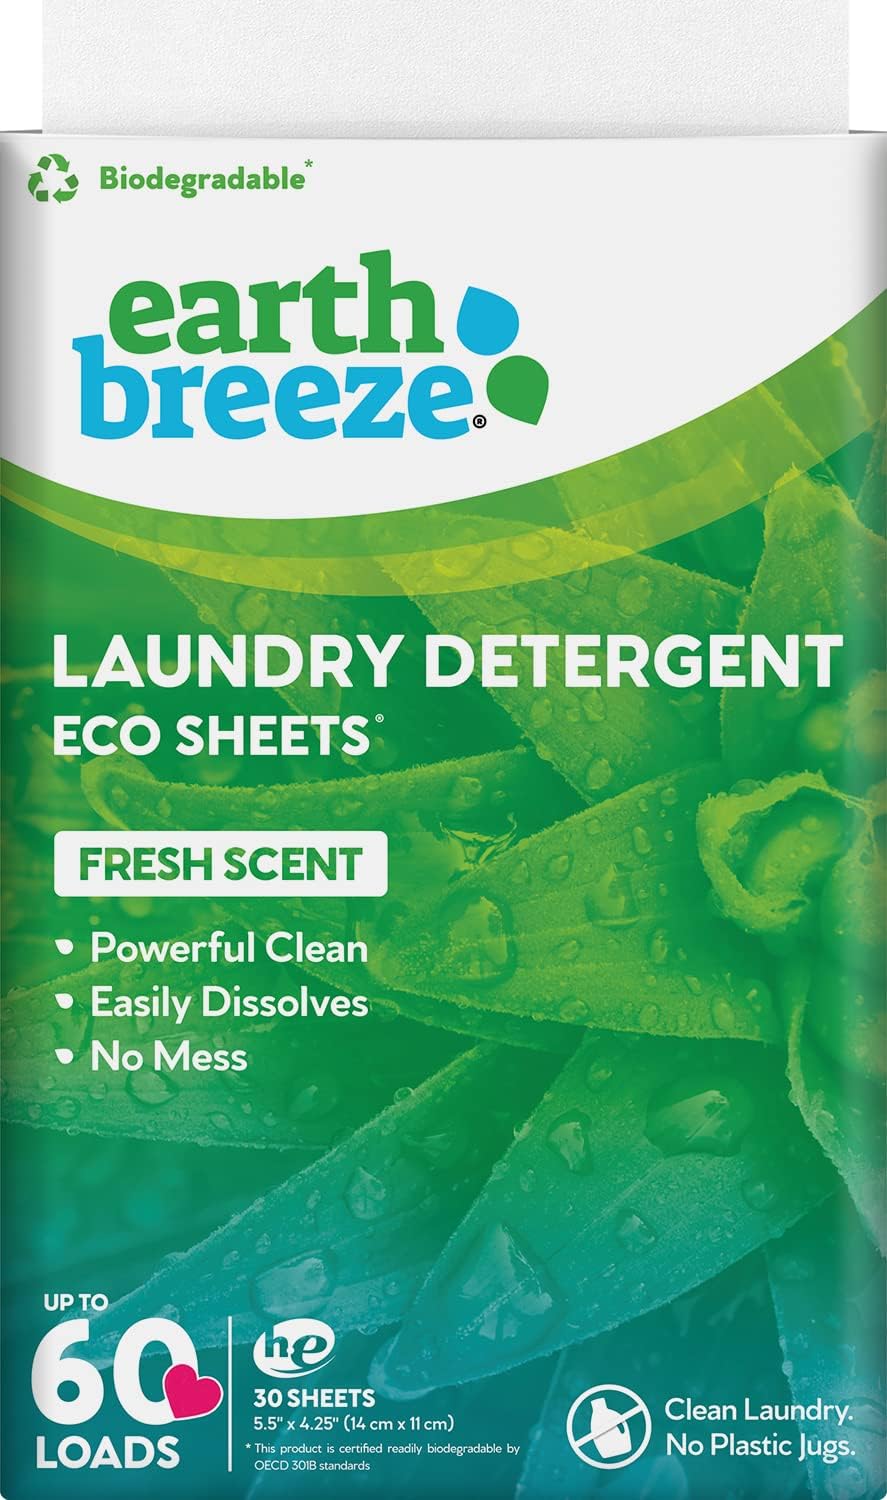 Zero Waste Club Zero Waste Club Laundry Detergent Sheets - Plastic Free -  Pack of 64: Unscented